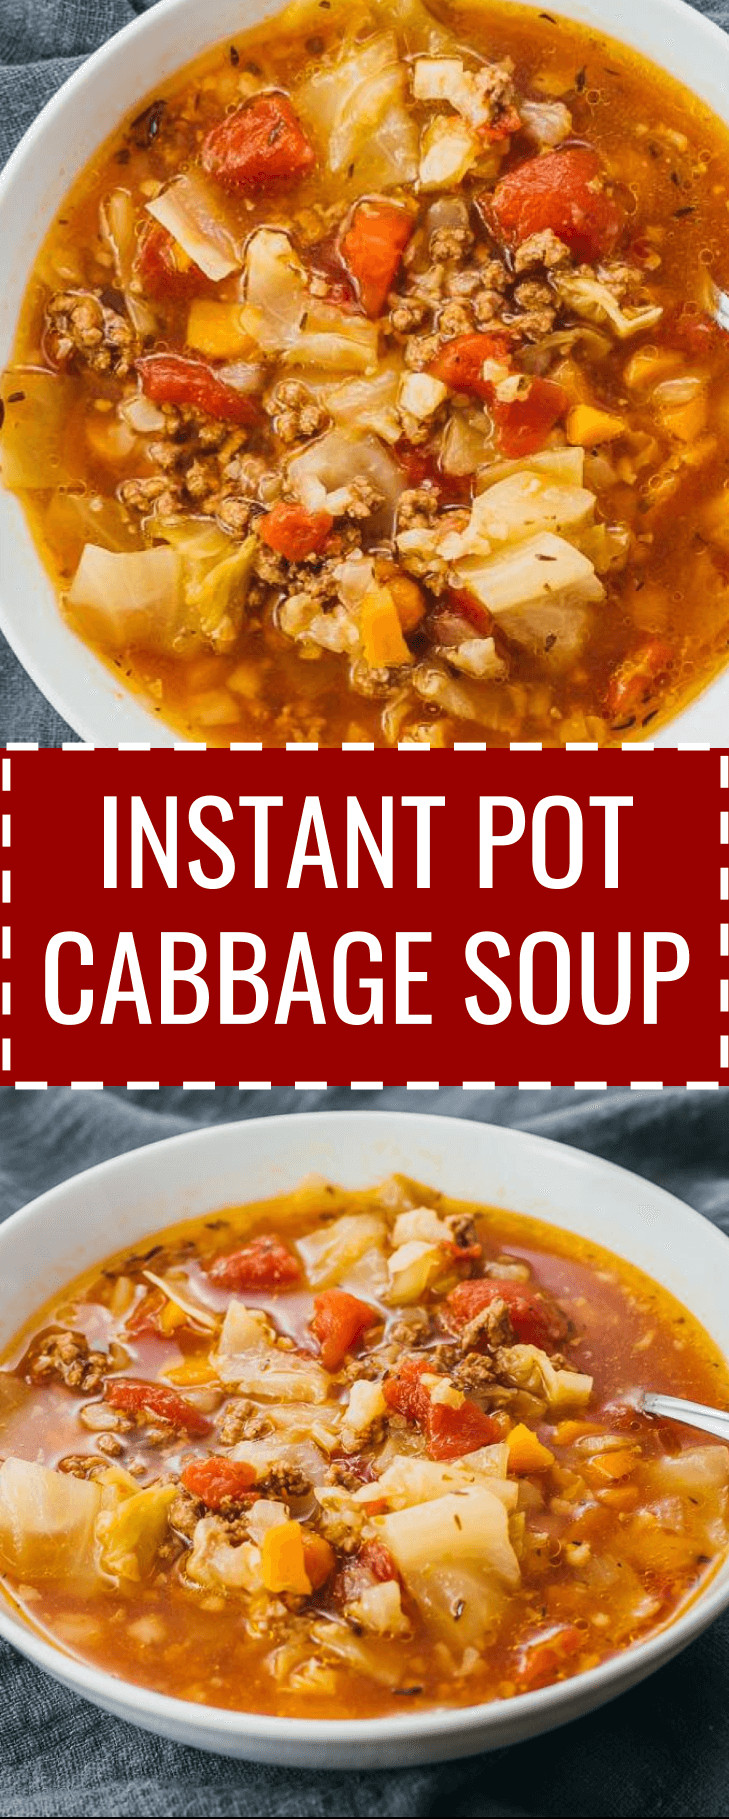 Instant Pot Cabbage Recipe
 This hearty Instant Pot cabbage soup recipe with ground